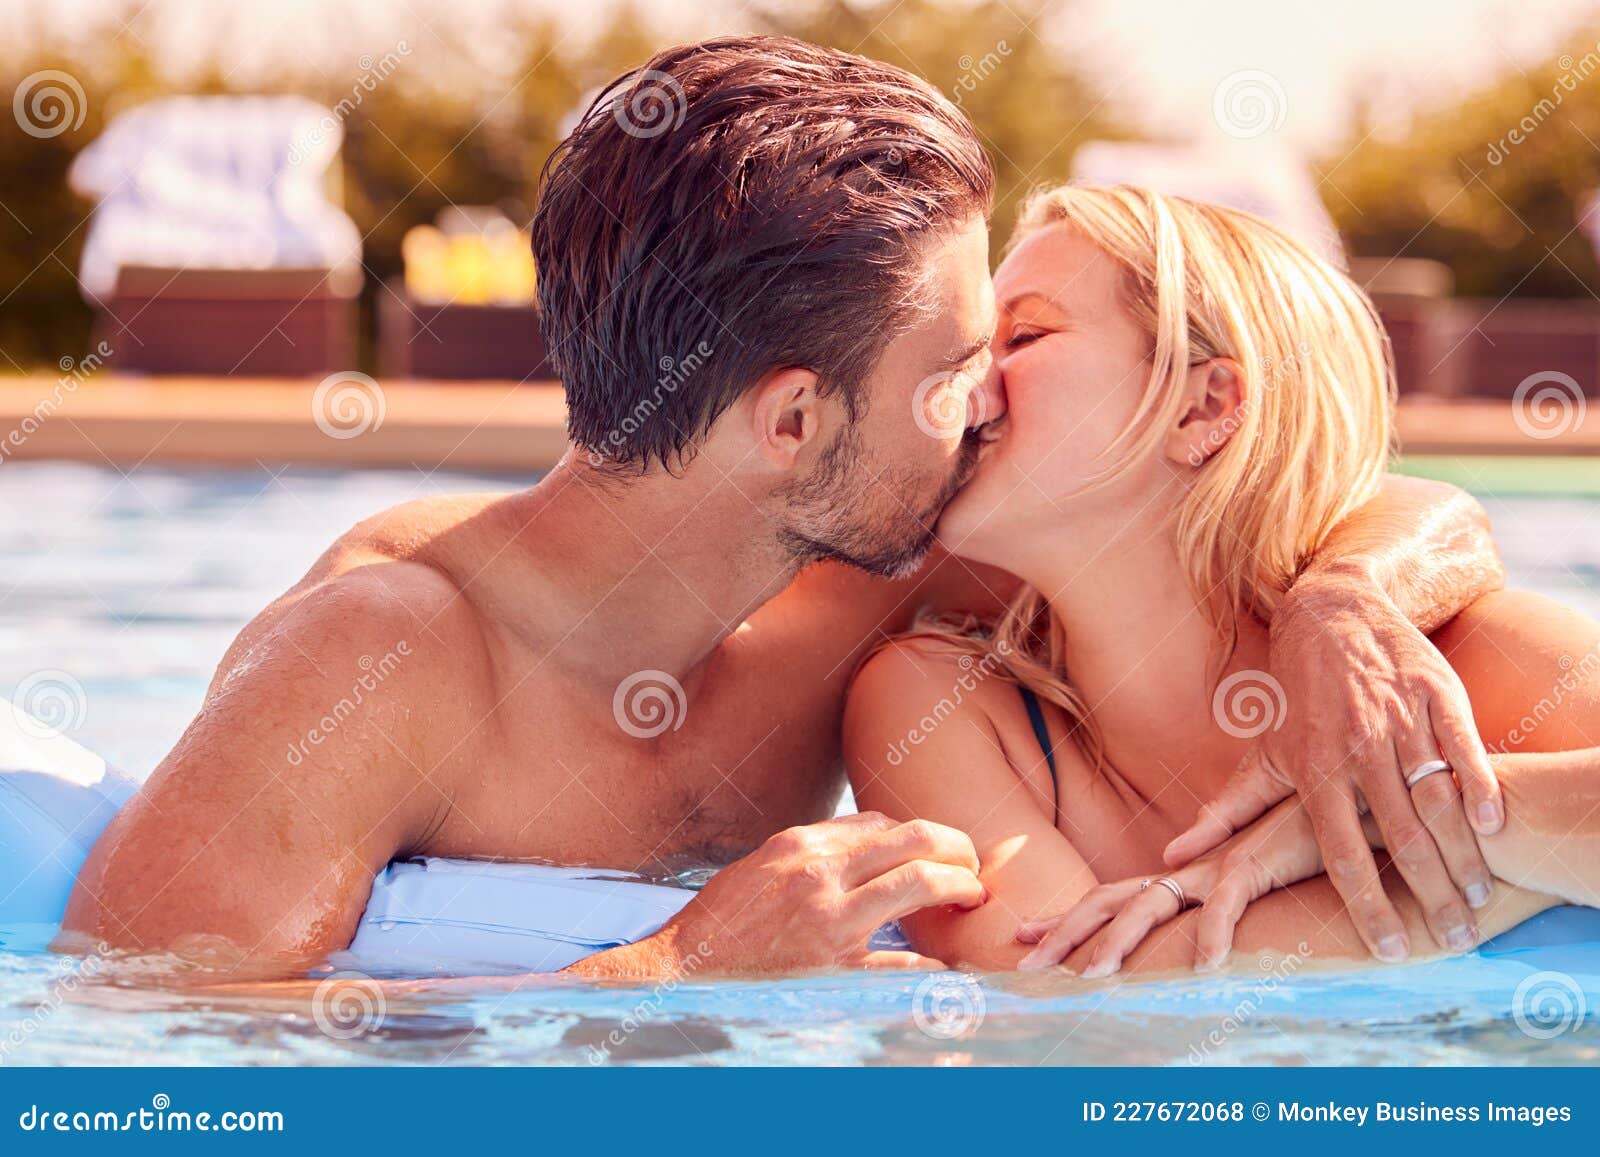 Girls Kissing In The Pool